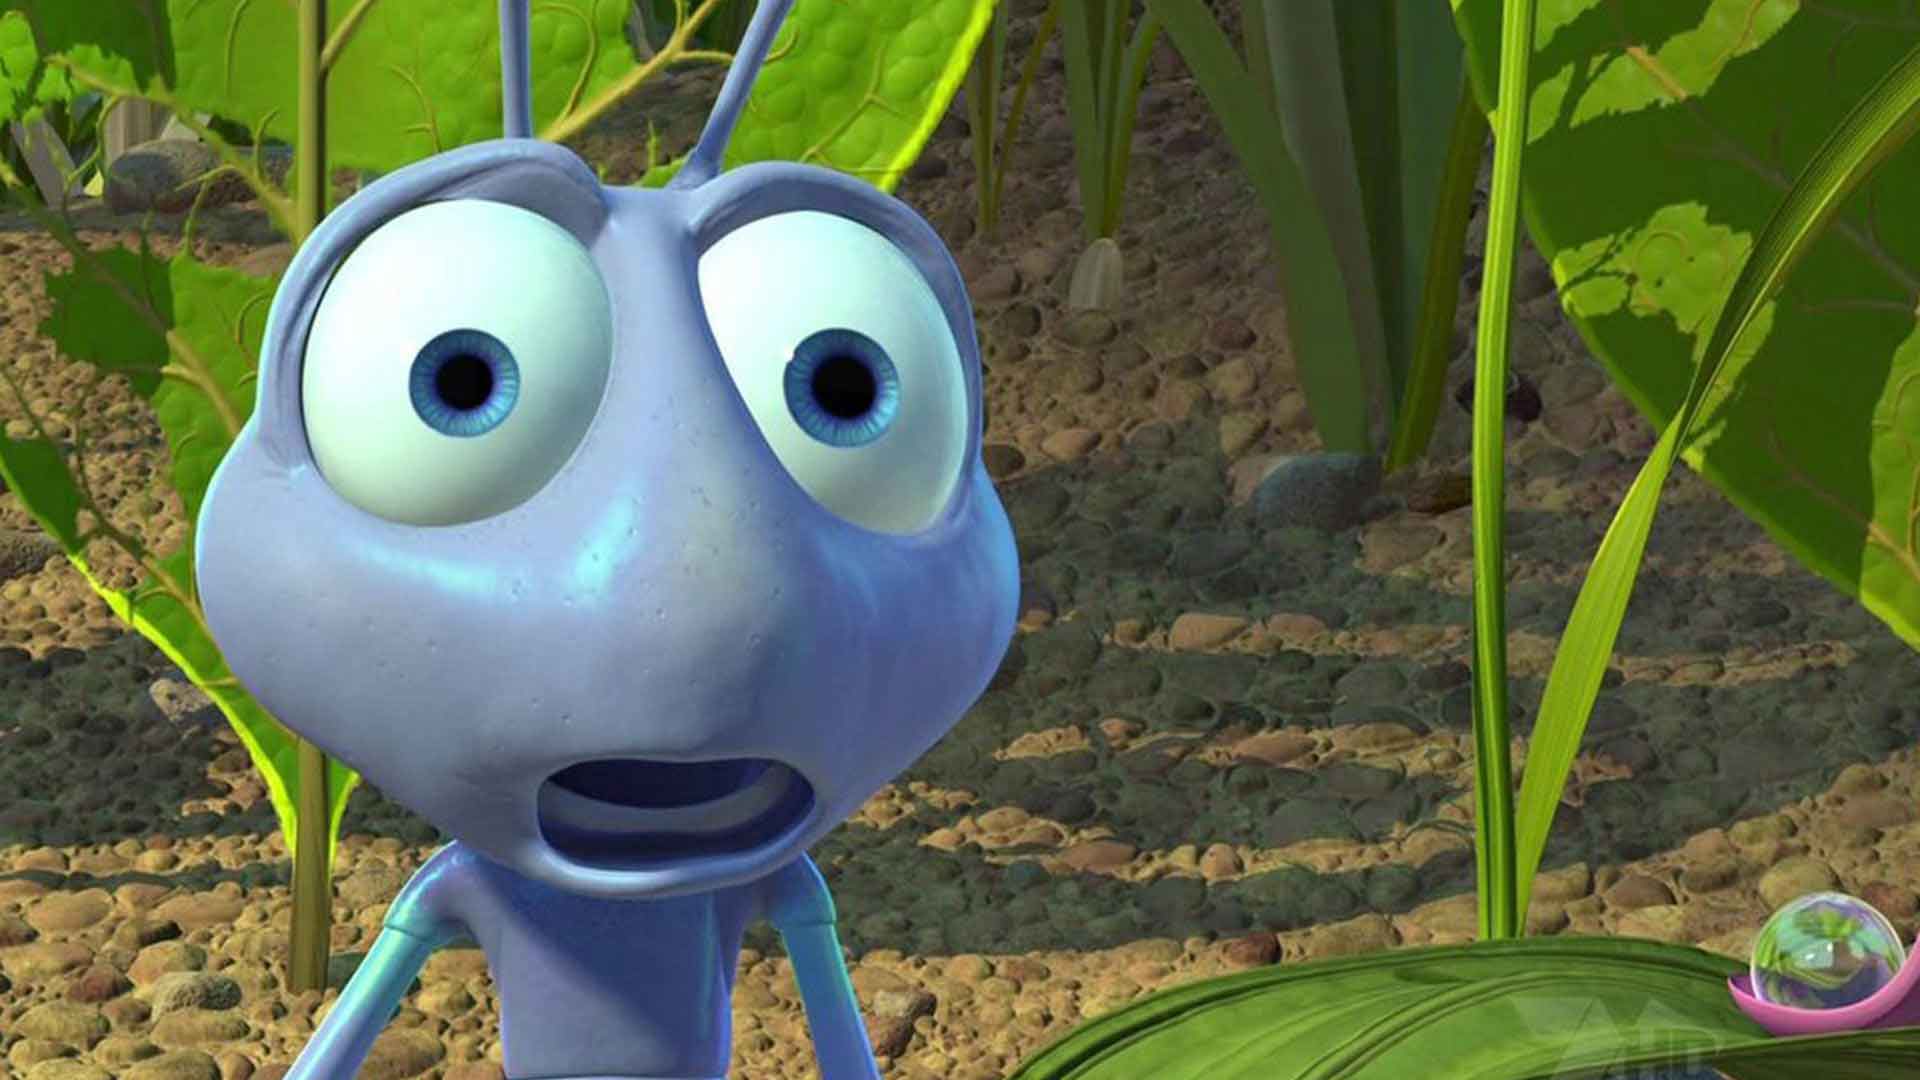 Flick is looking at the animation of an insect life